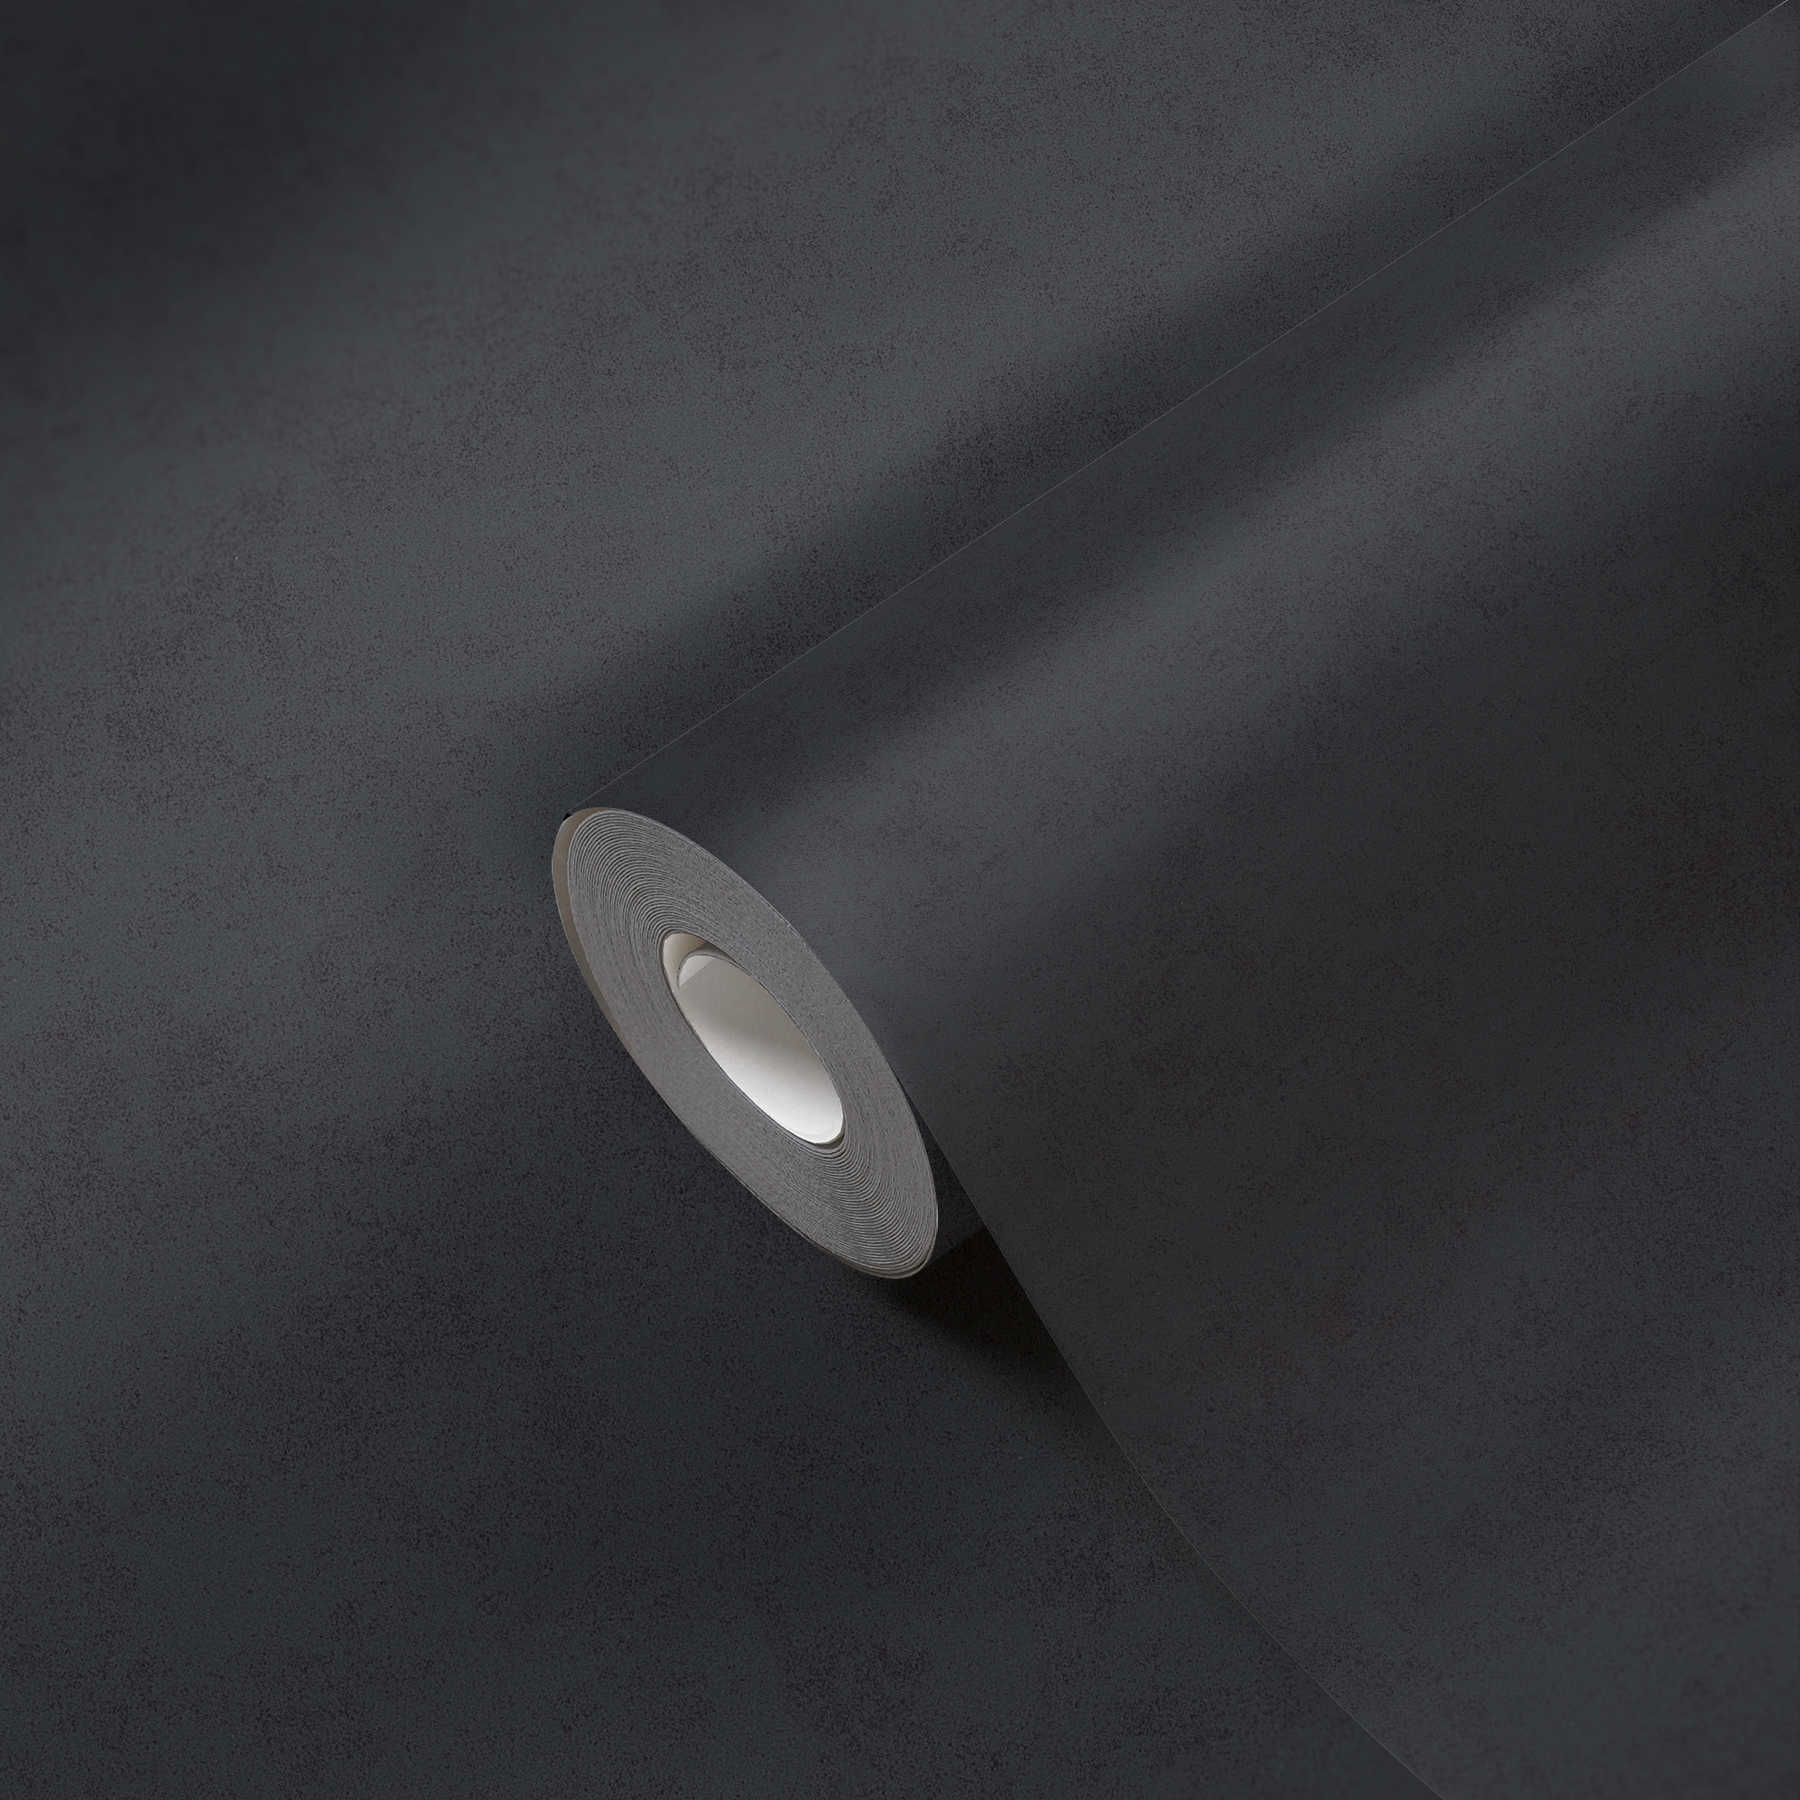             Plain non-woven wallpaper with mottled structure - black
        